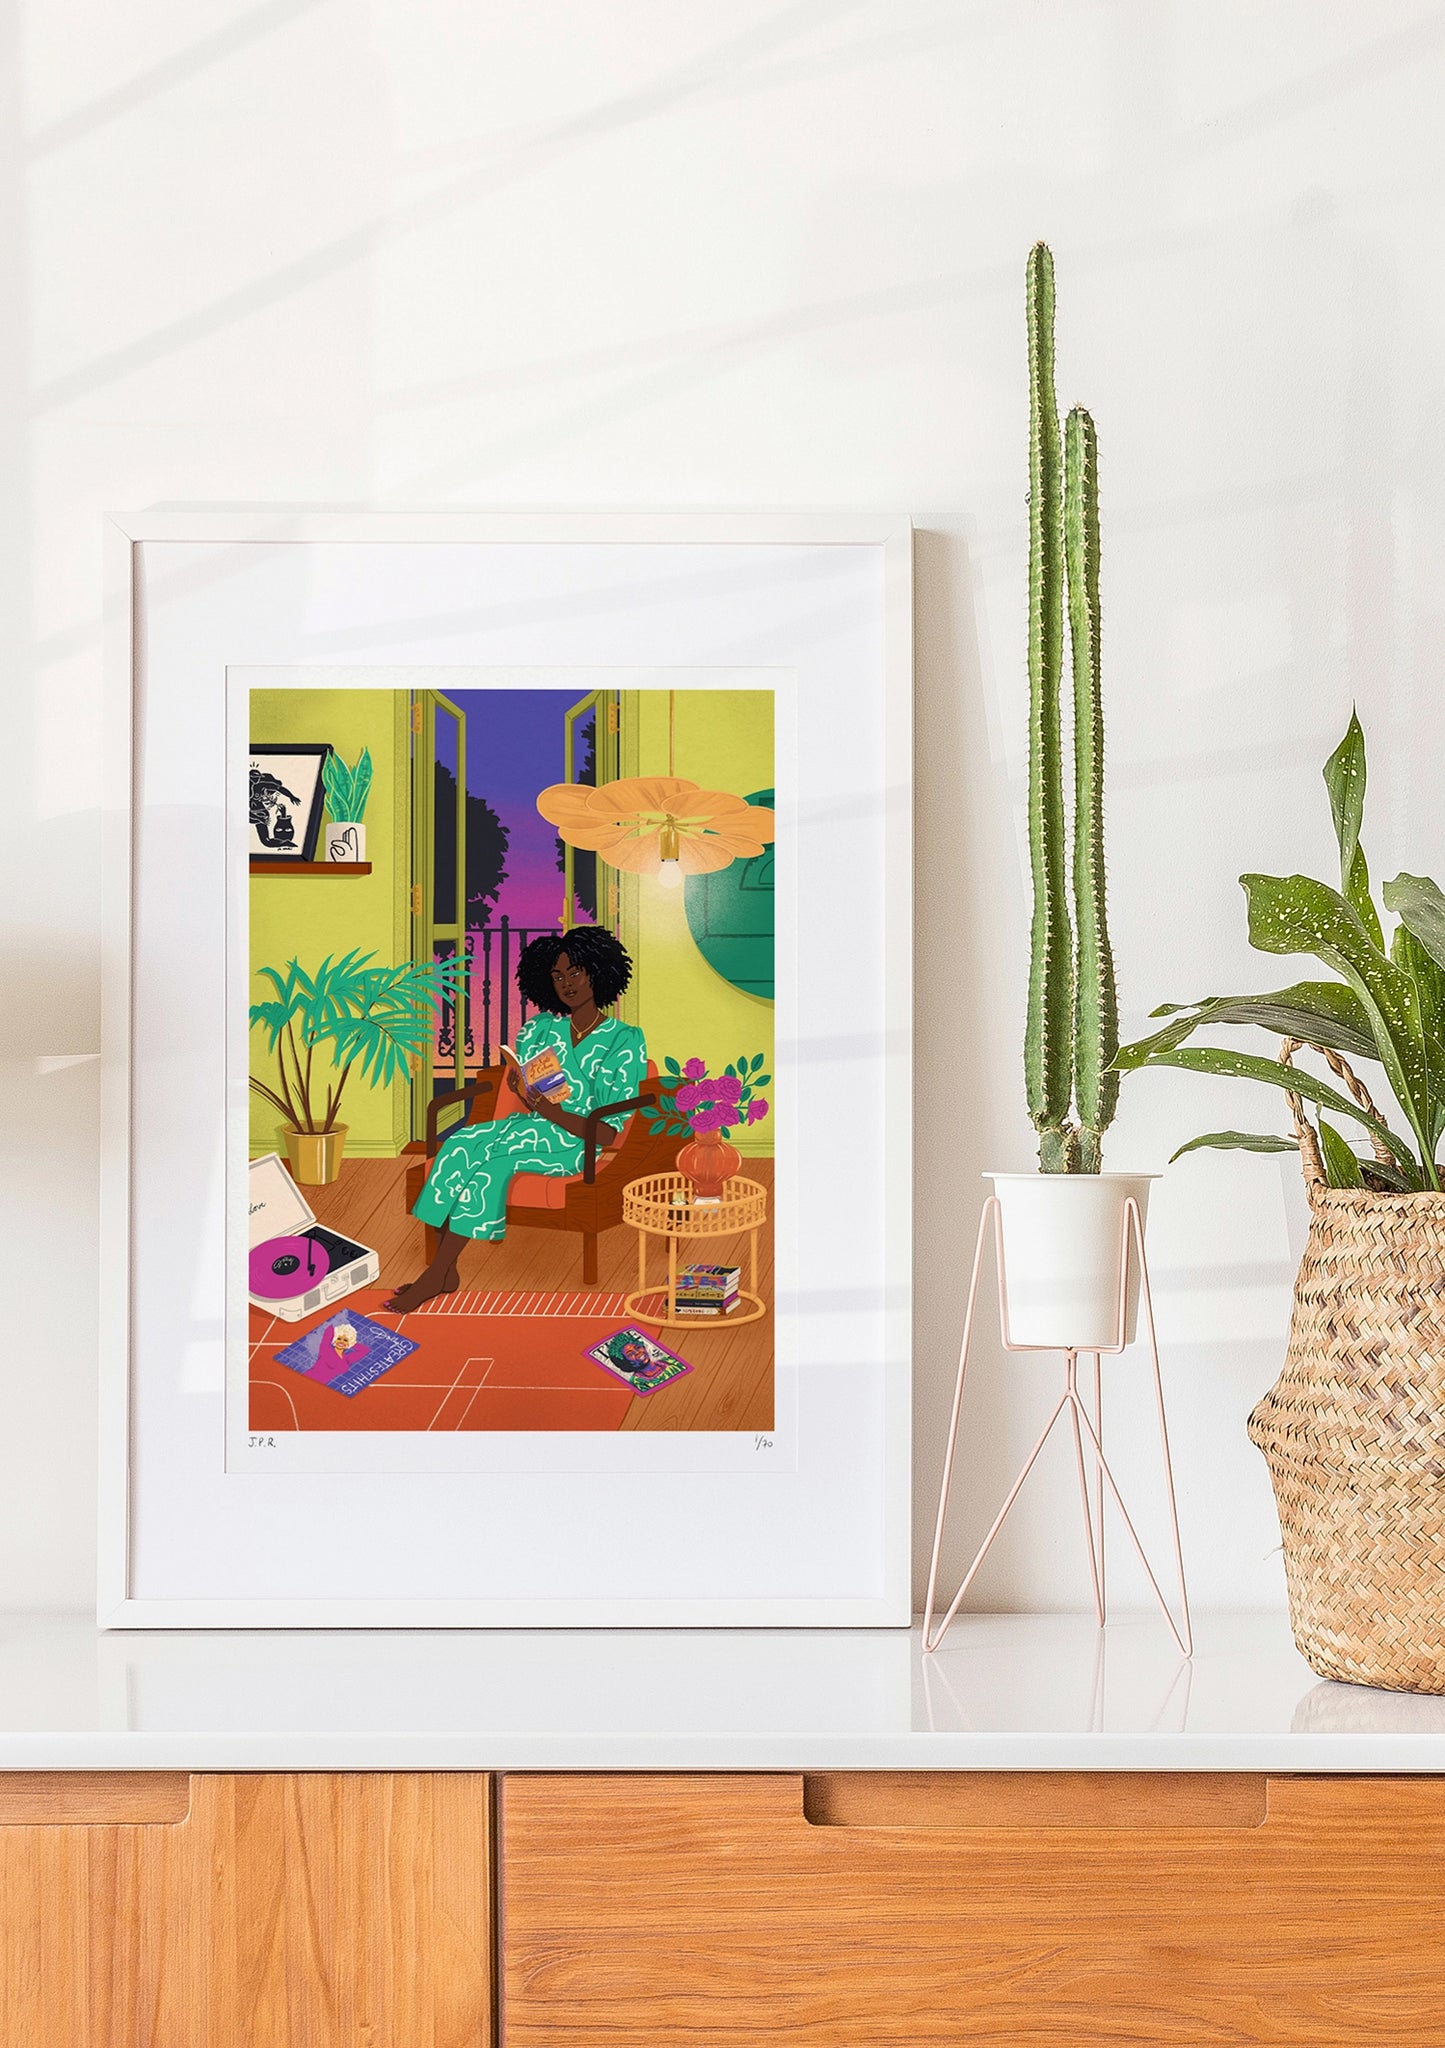 Framed illustration of a Black woman reading the book In Spite of Oceans by Huma Qureshi. She is sat by the opened door giving out to a sunset and she is surrounded by books, magazines, and vinyls.